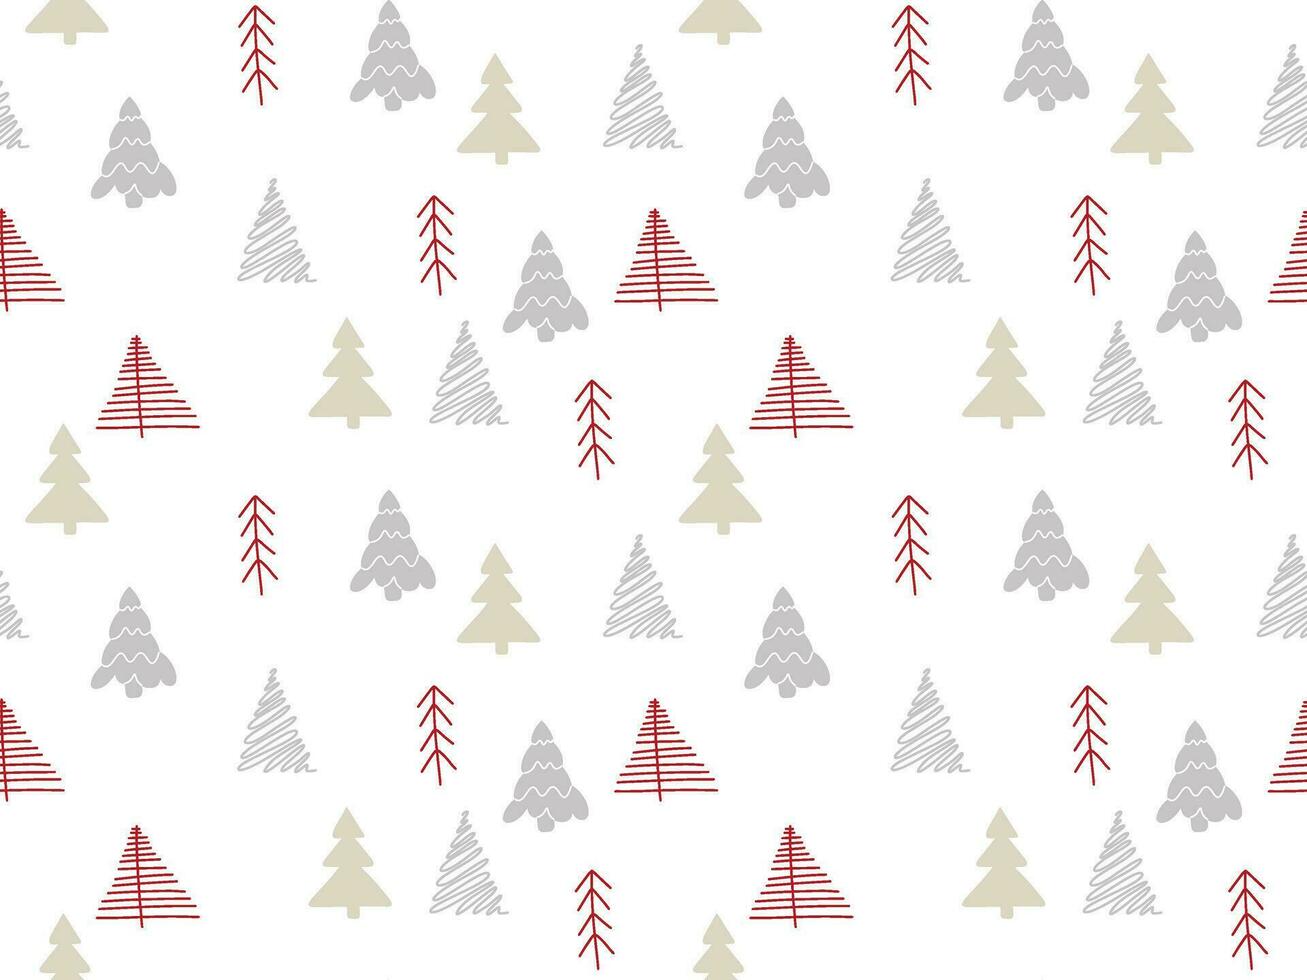 Hand drawn Christmas trees pattern. Seamless doodle vector illustration for wallpaper, textiles, wrapping